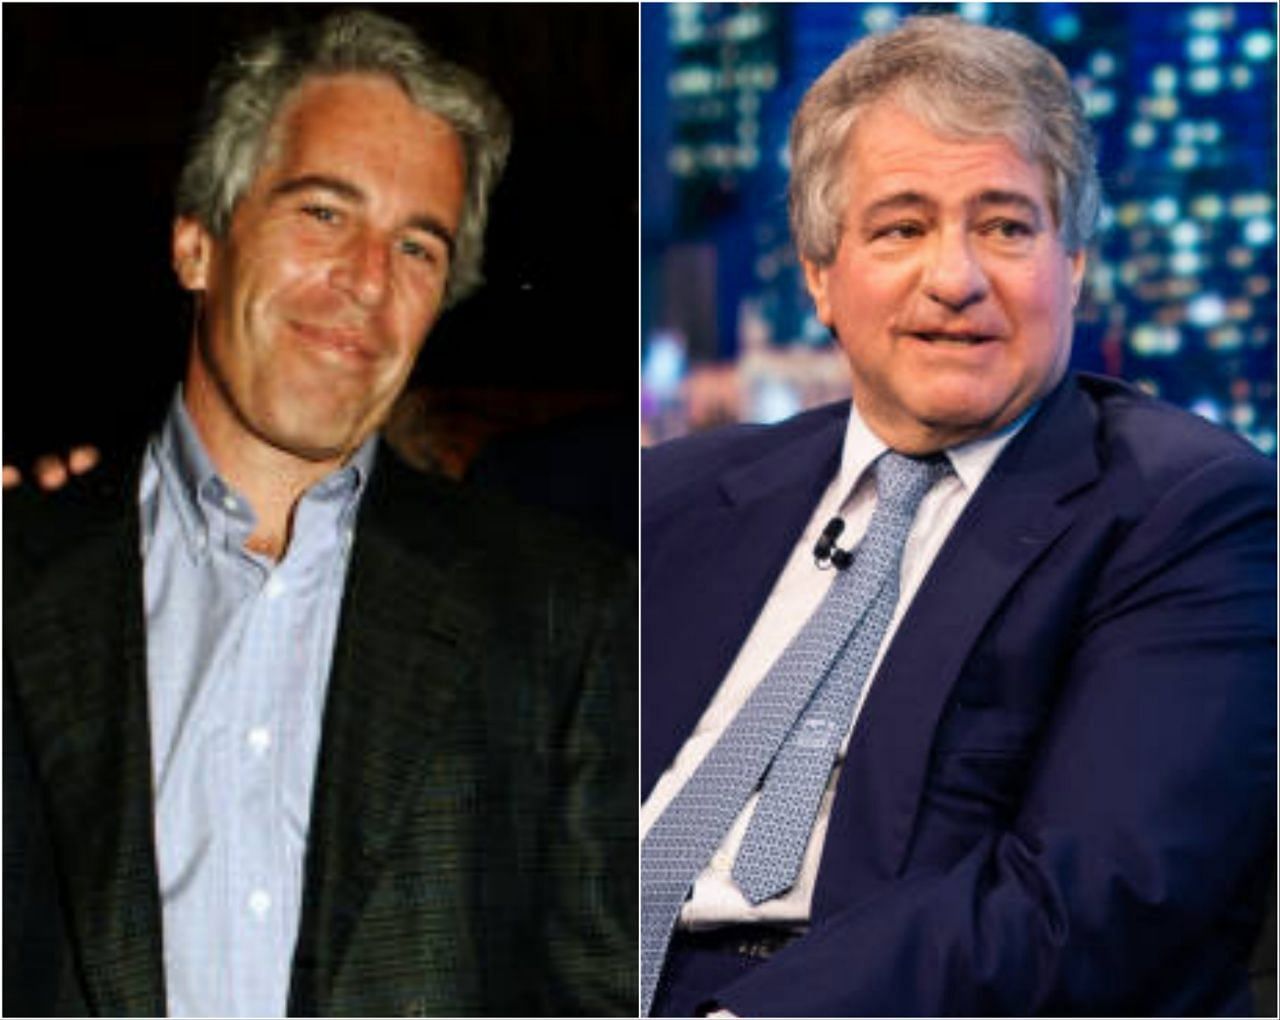 Black stepped down from the post of CEO following ties with Epstein (Image via Getty)